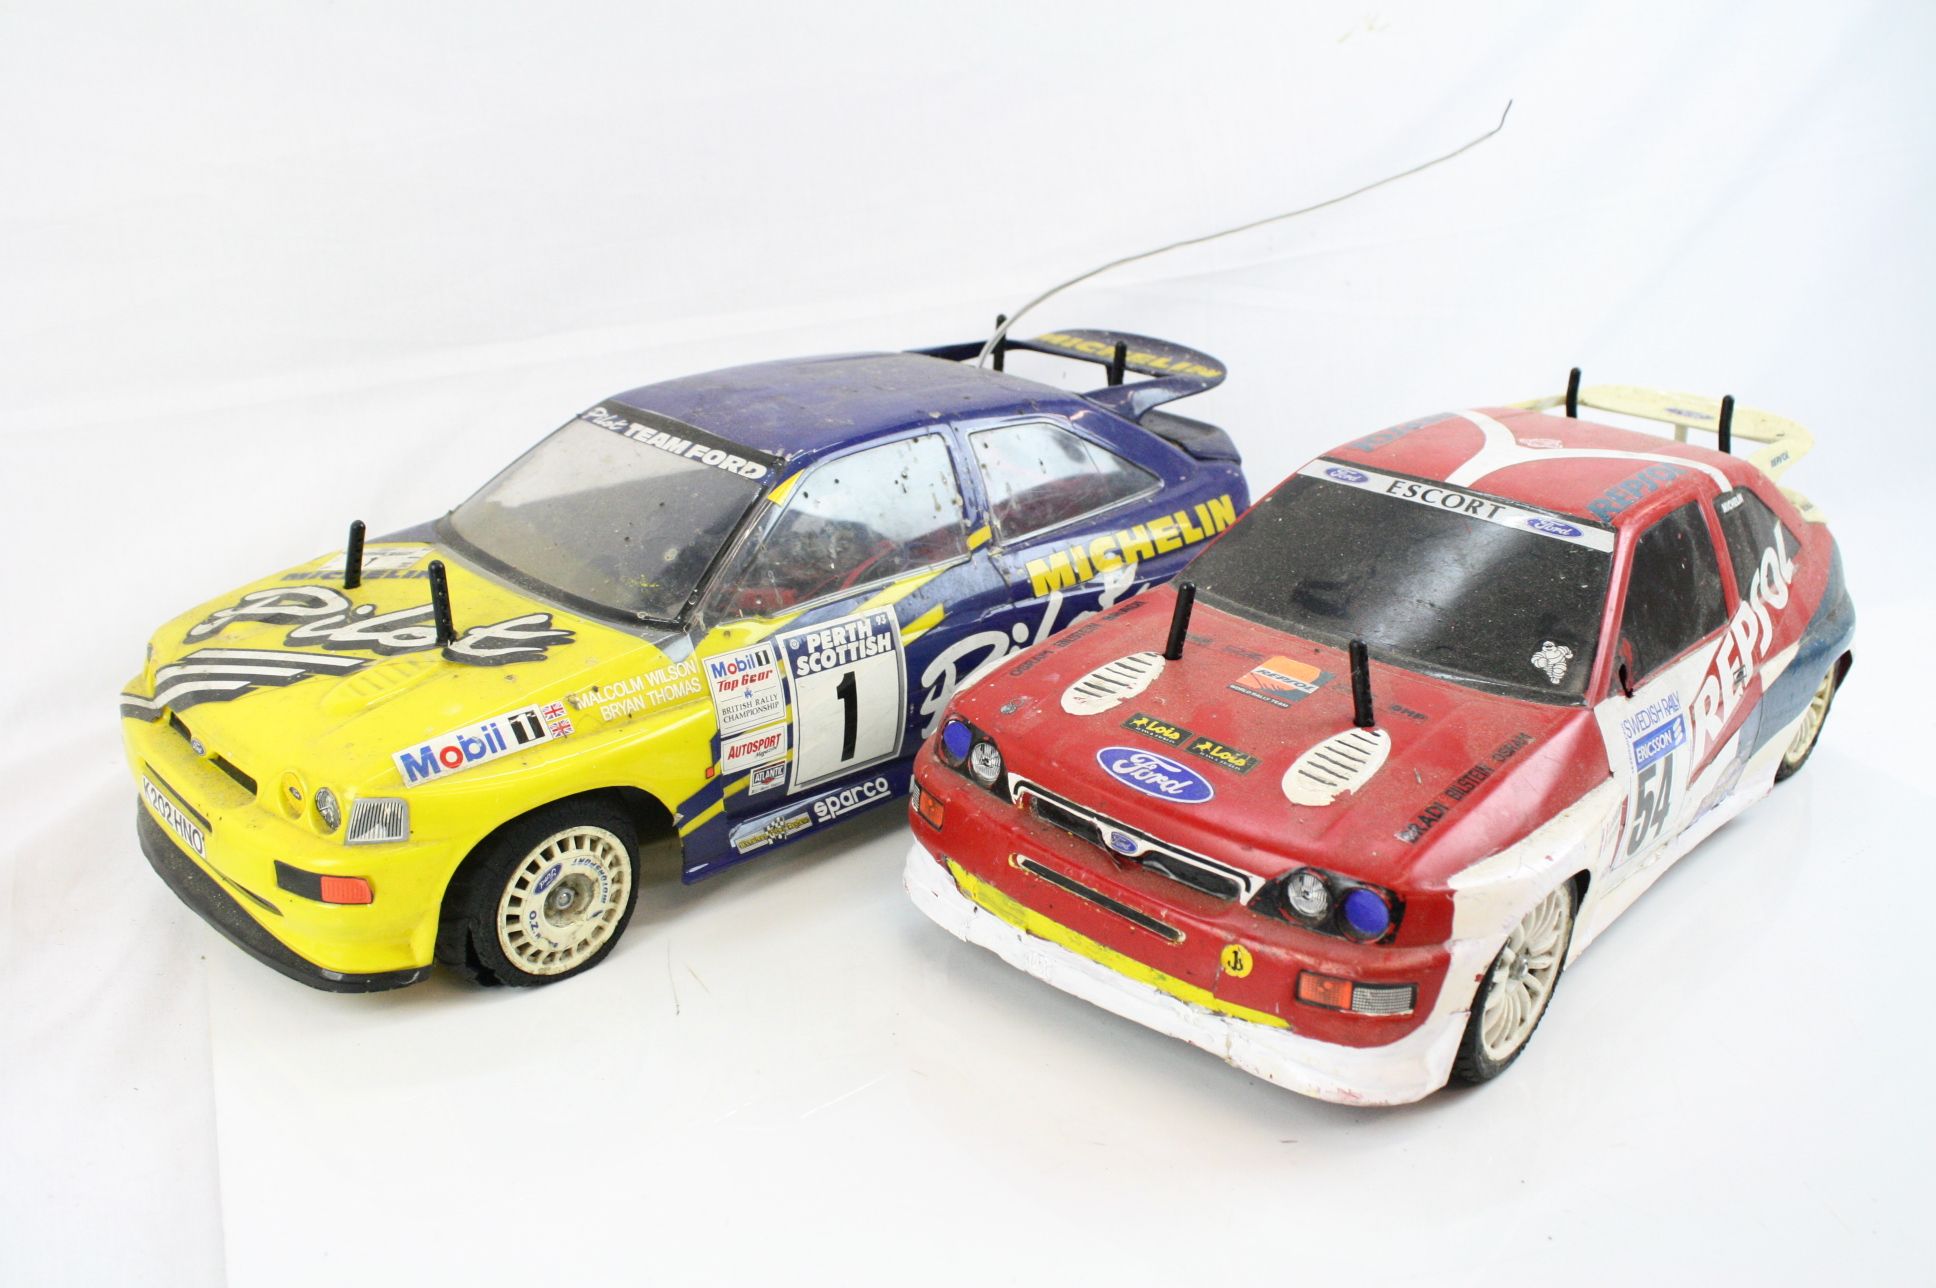 A Tamiya 58125 Ford Escort RS Michelin Pilot with TA01 chassis together with a Tamiya Ford Escort RS - Image 5 of 5